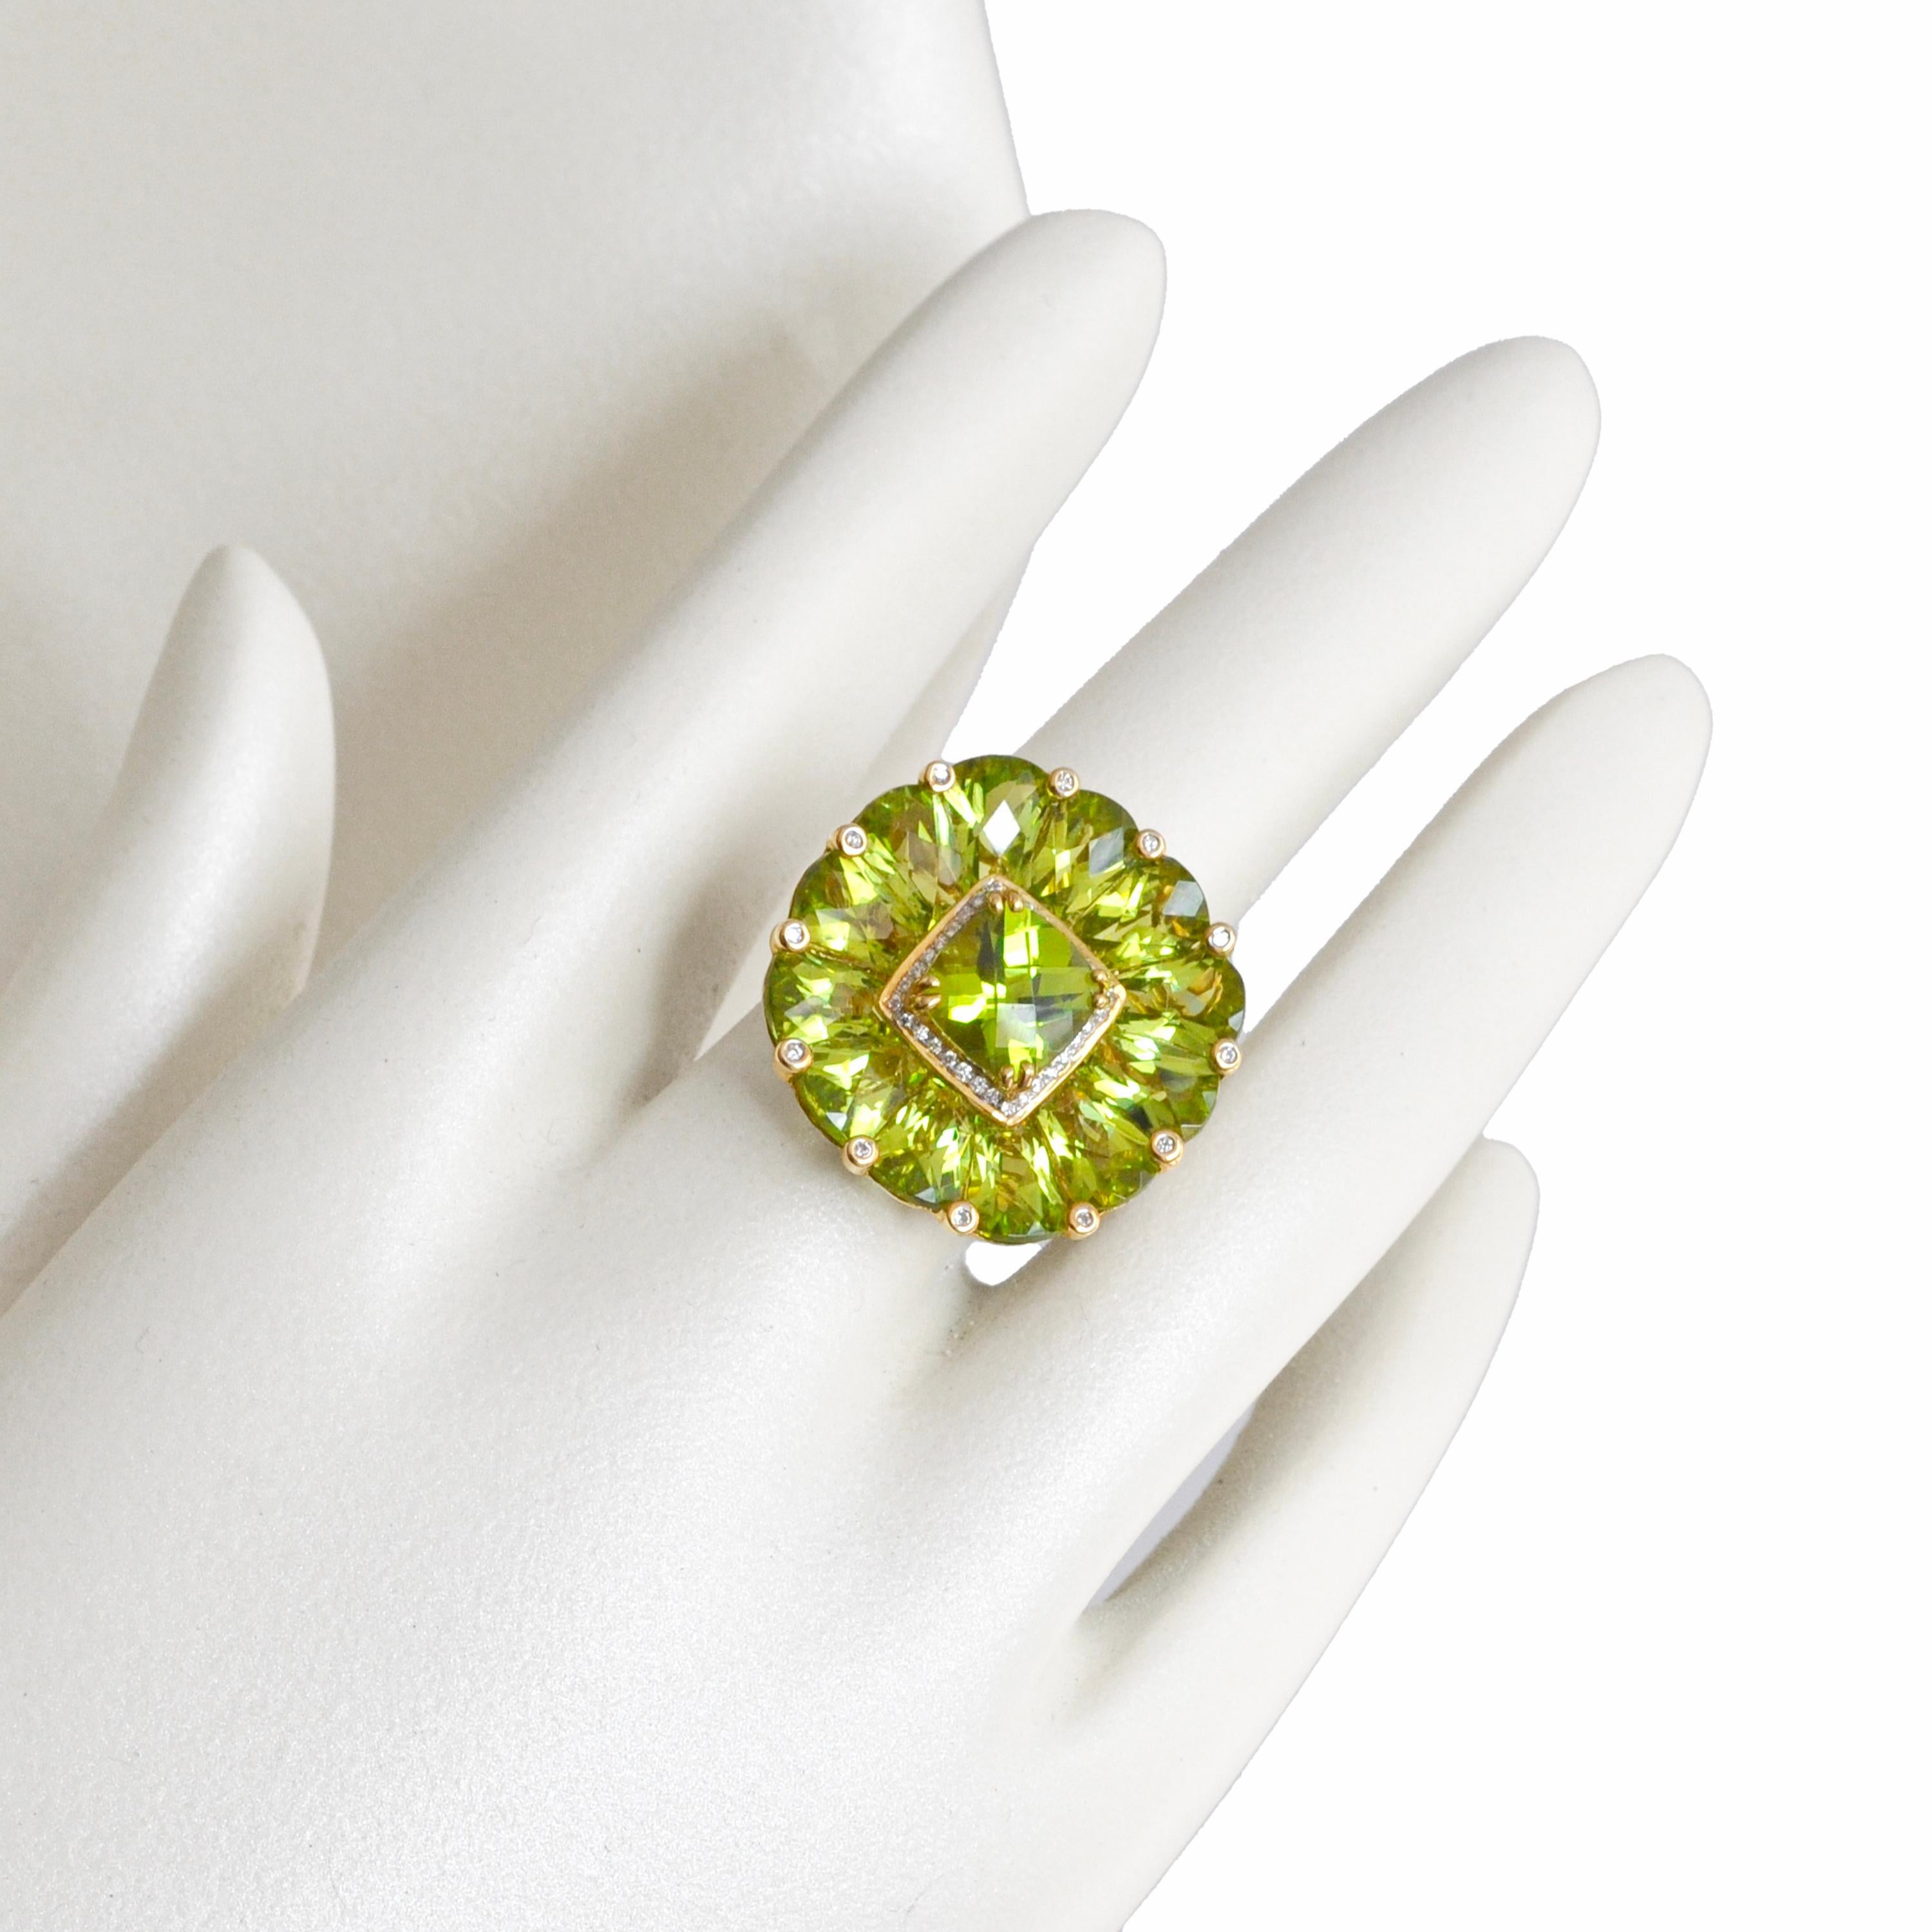 14 karat yellow gold natural peridot special cut flower contemporary cocktail ring

Our peridot brilliance ring is a dazzling variation of timeless elegance. Crafted in 14-karat gold, this ring features a central cushion-cut peridot, prong-set to